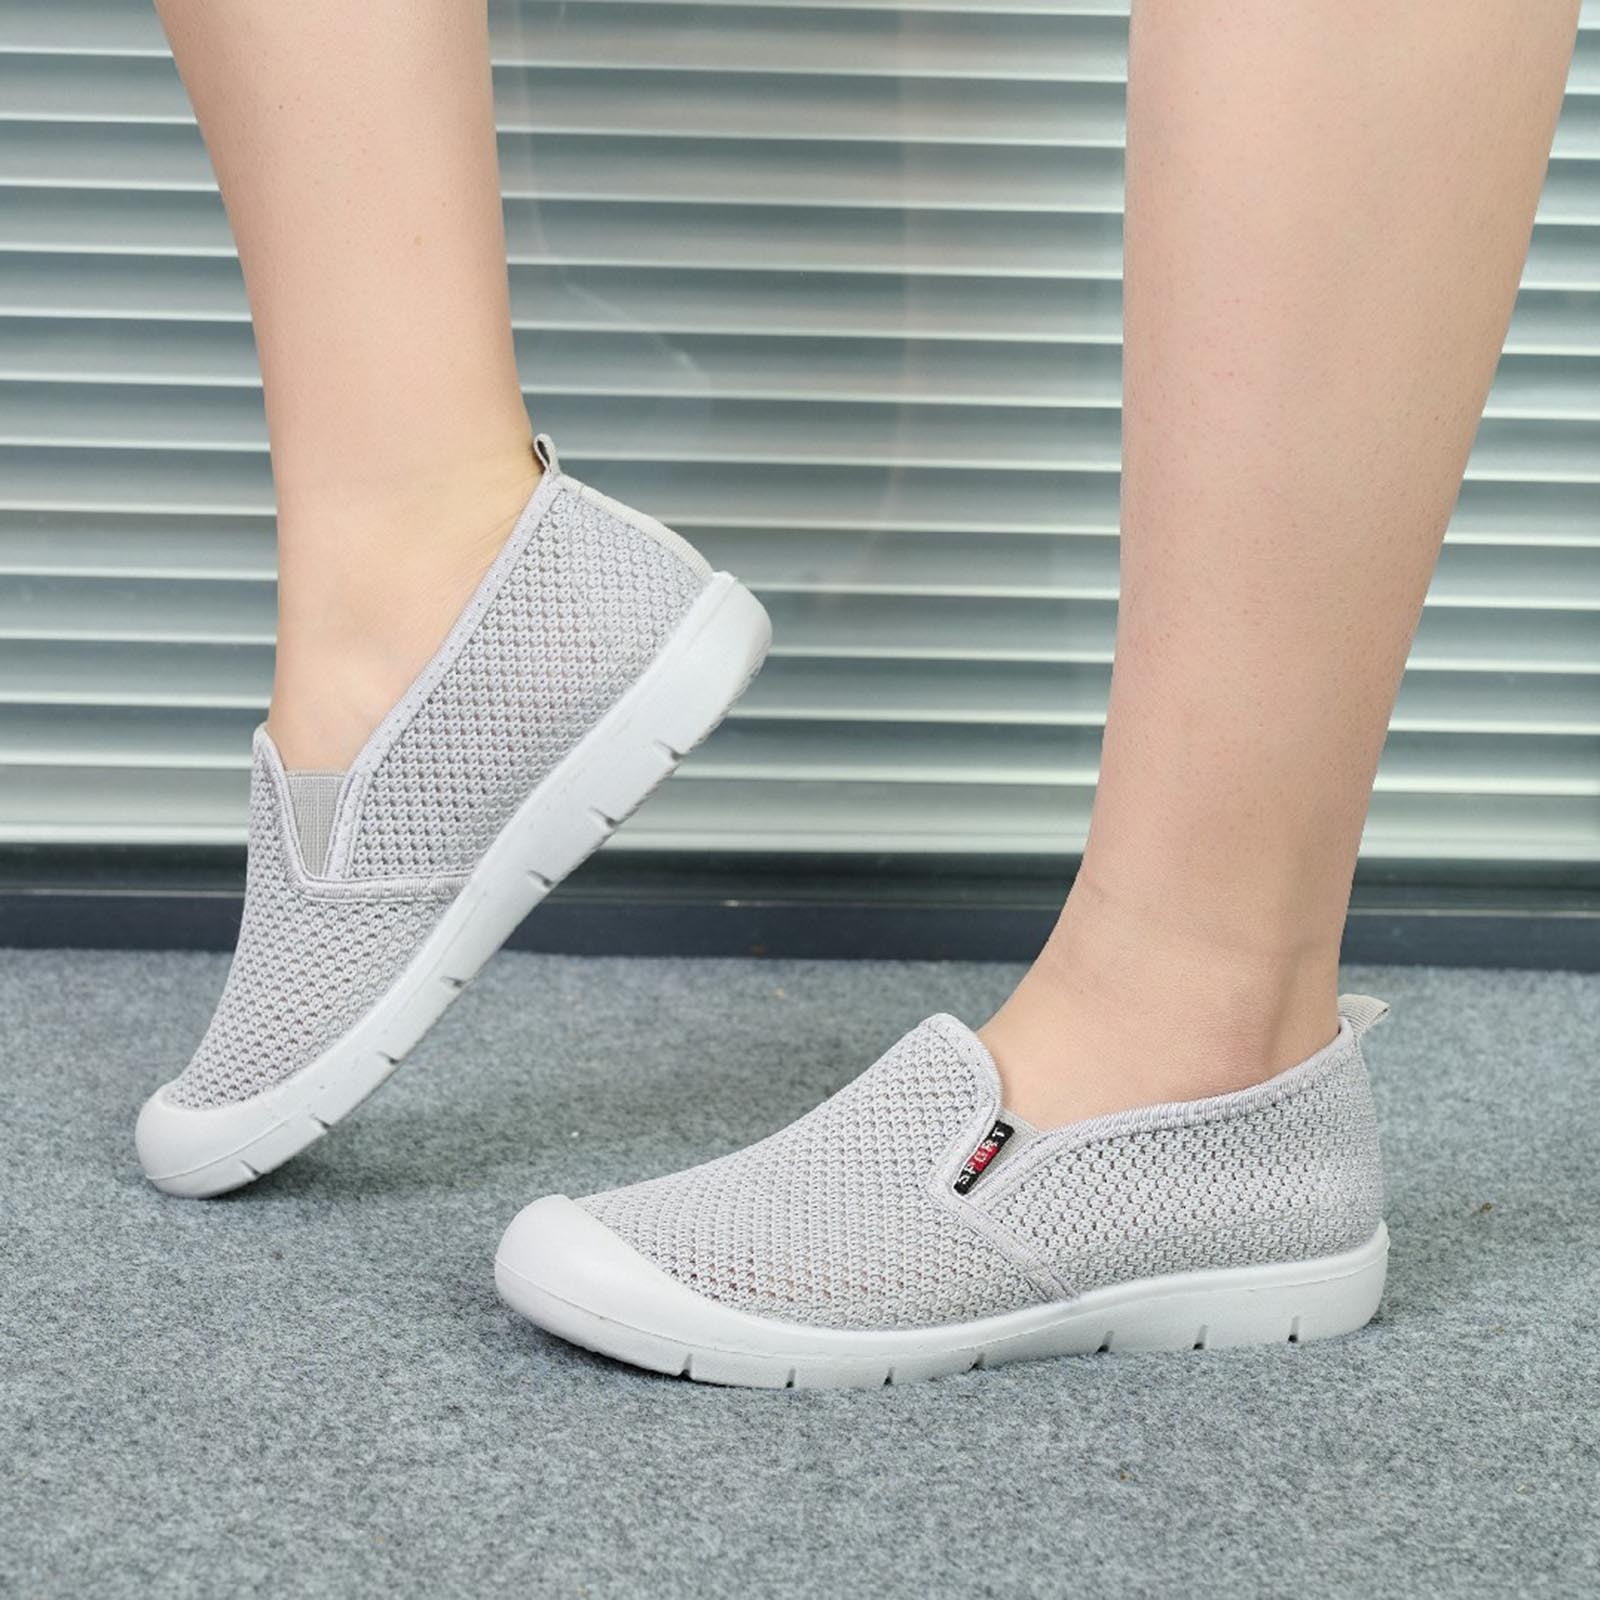 Ladies Shoes Lightweight Comfortable Shoe Cover Foot Flat Work